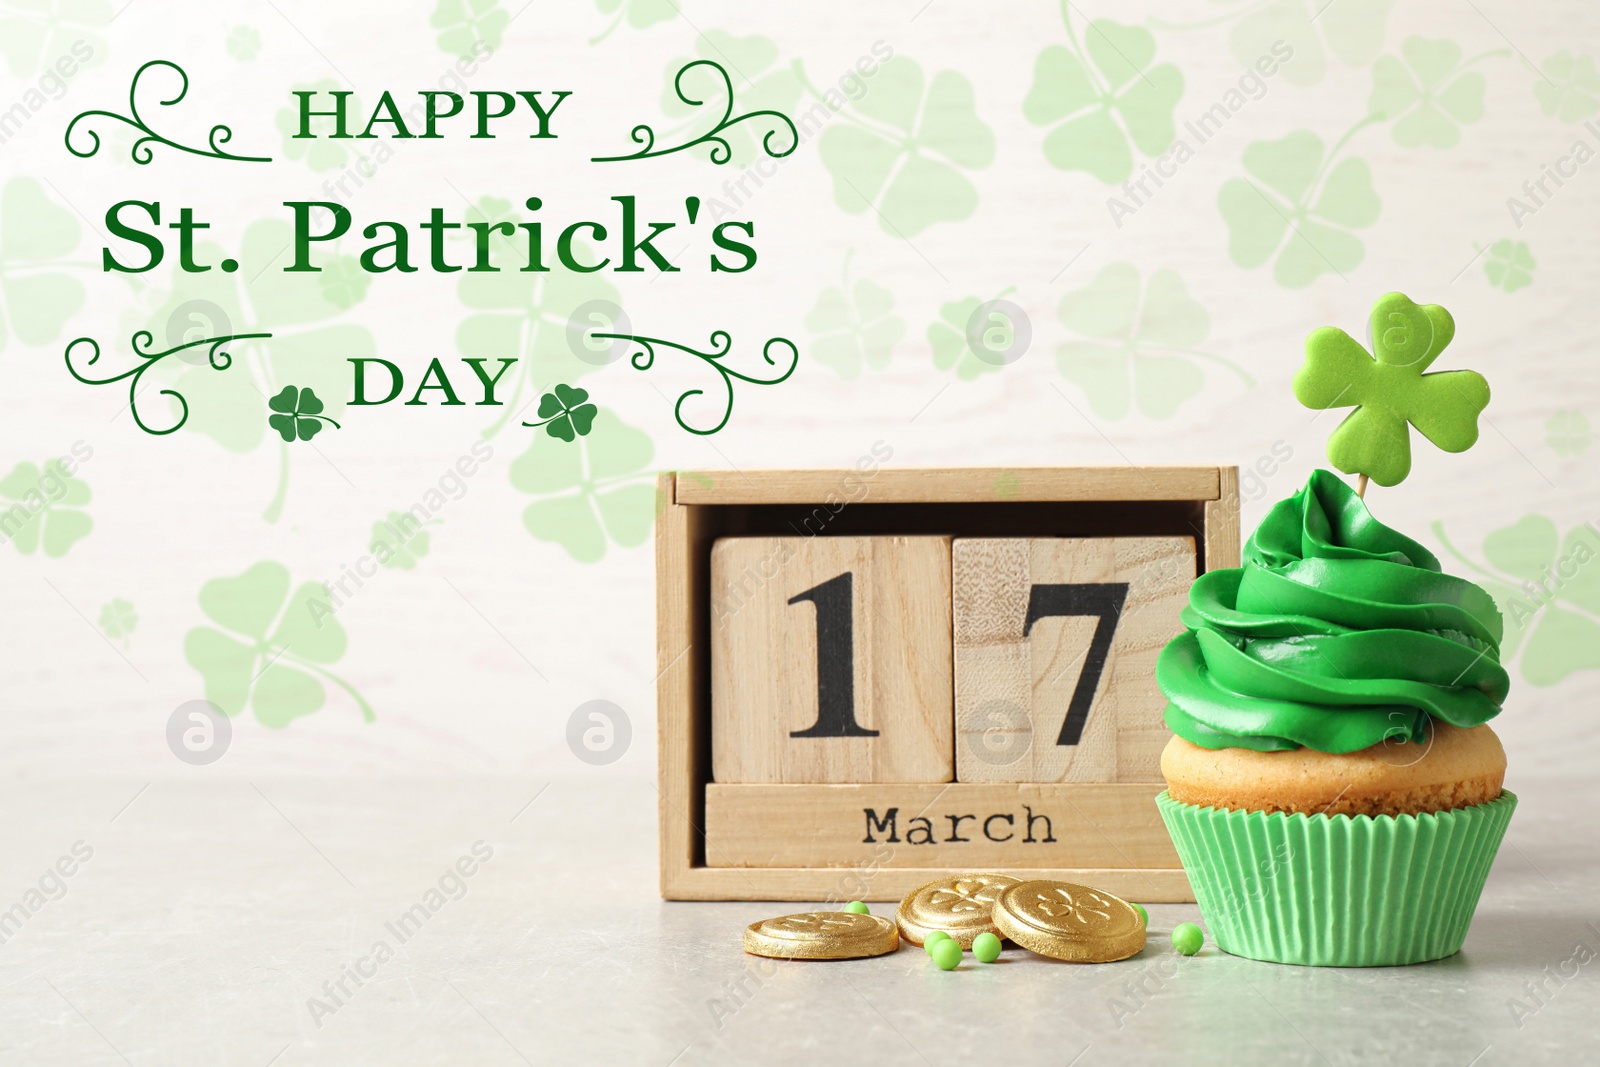 Image of Delicious decorated cupcake, wooden block calendar and coins on light table. St. Patrick's Day celebration